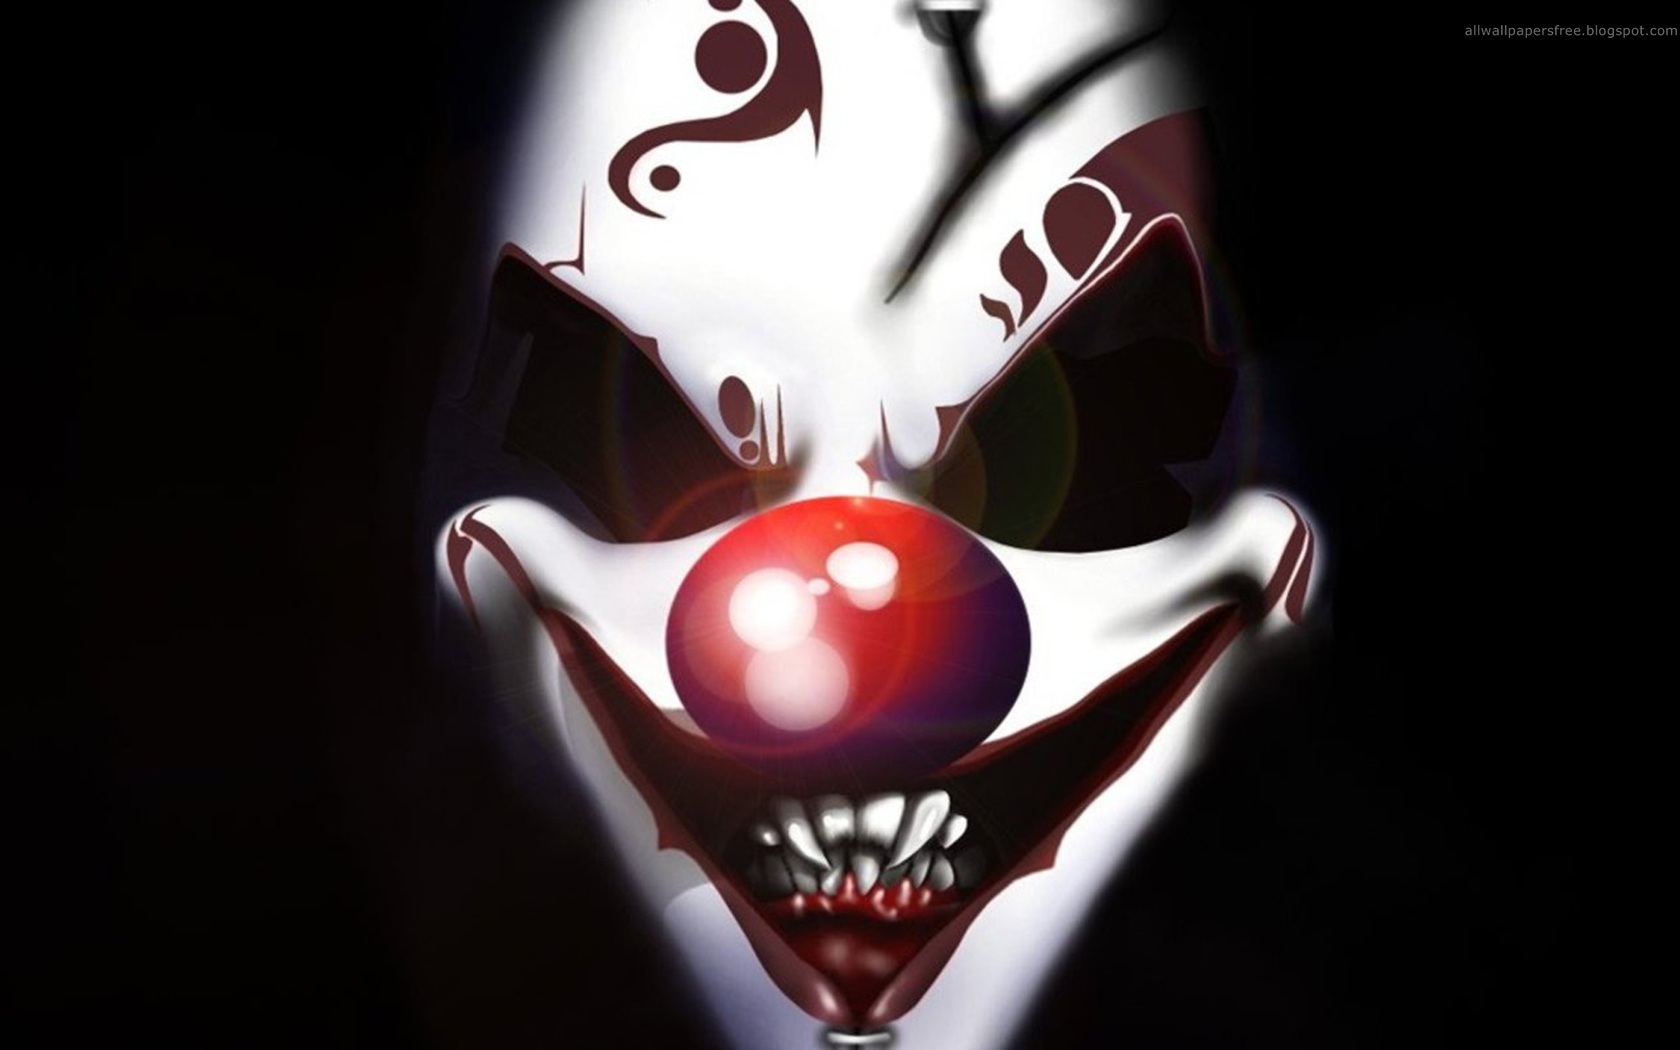 Evil Clown Wallpaper submited images